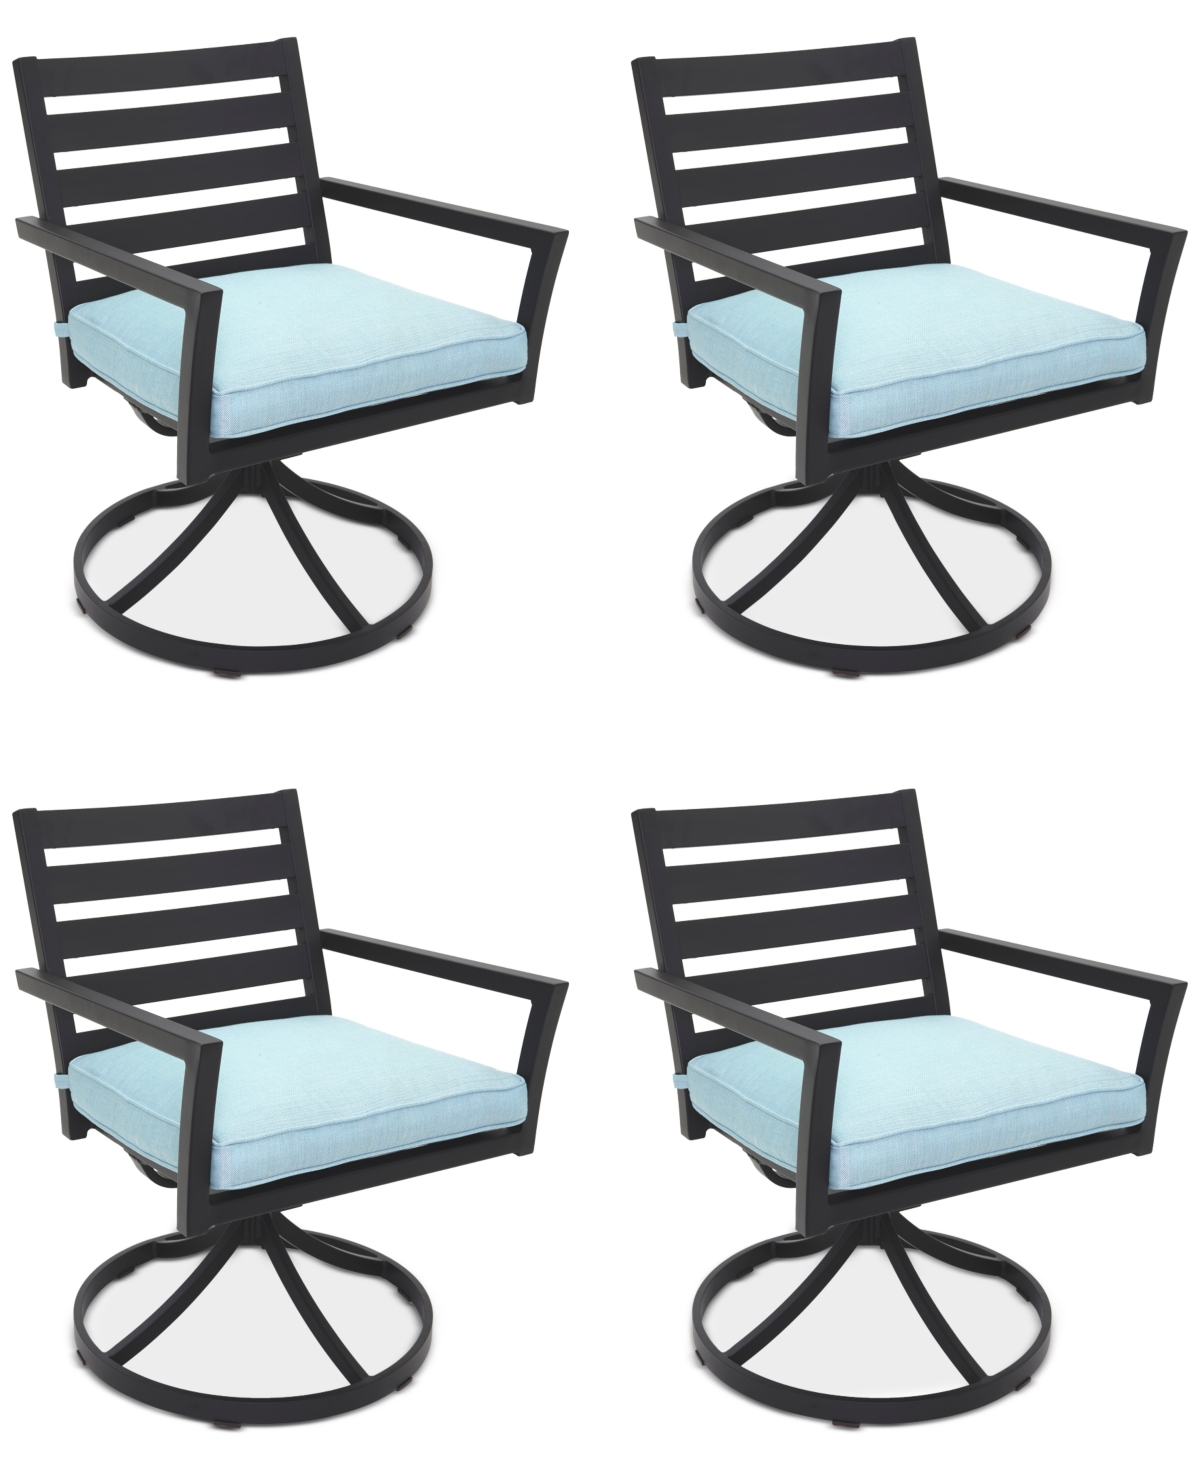 Agio Astaire Outdoor 4-pc Swivel Chair Bundle Set In Spa Light Blue